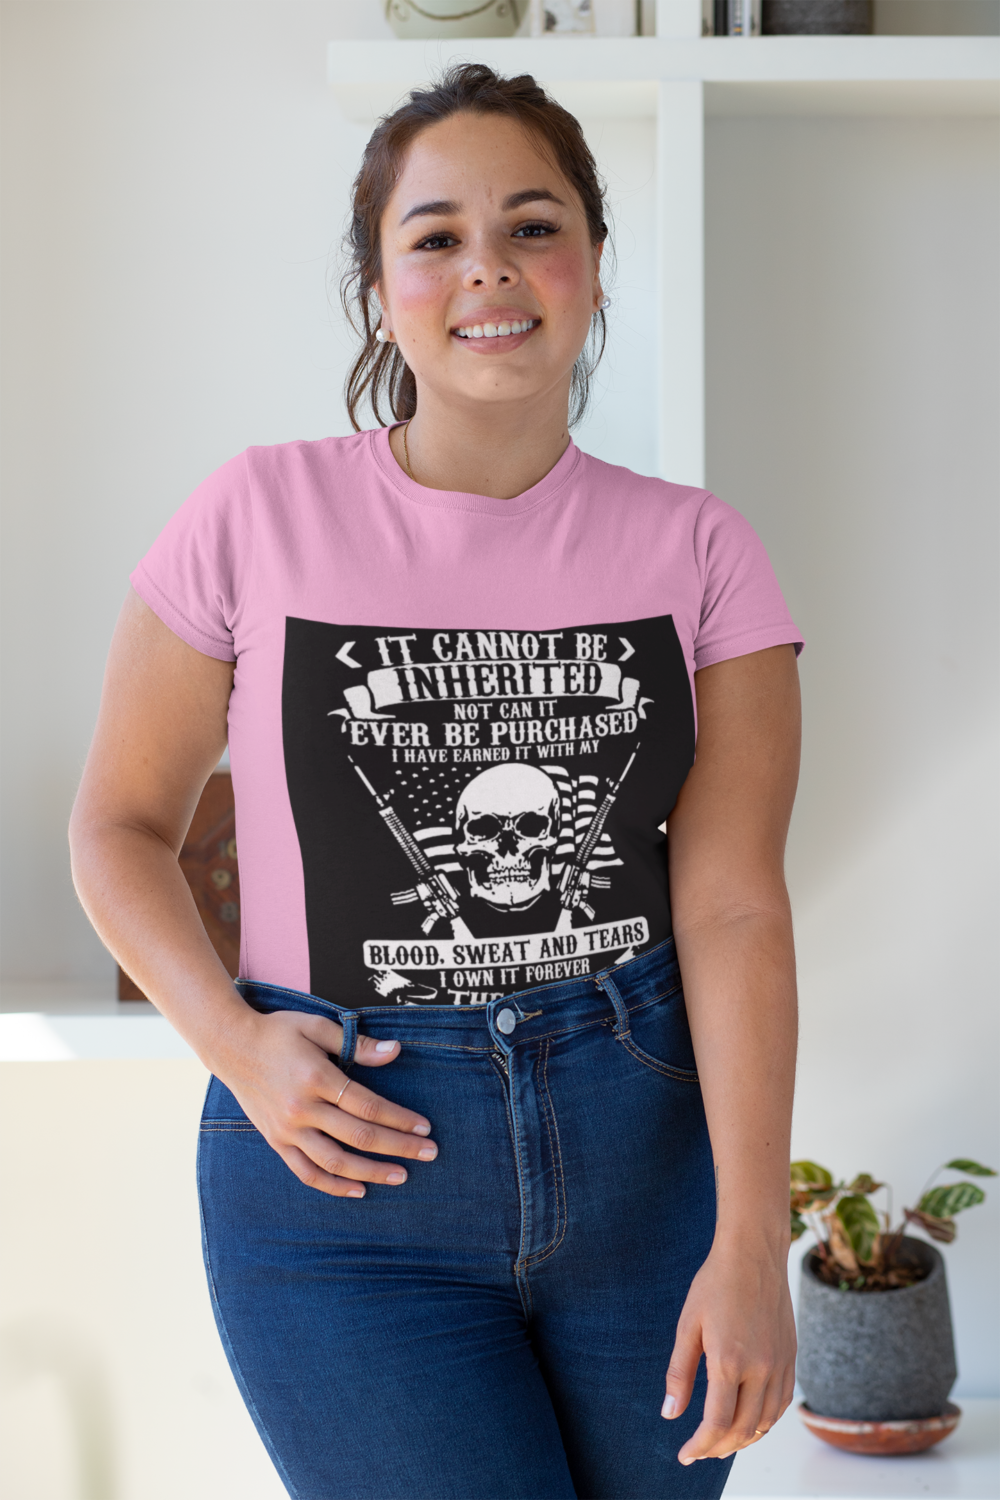 plus size t shirt mockup featuring a smiling woman 31033 1